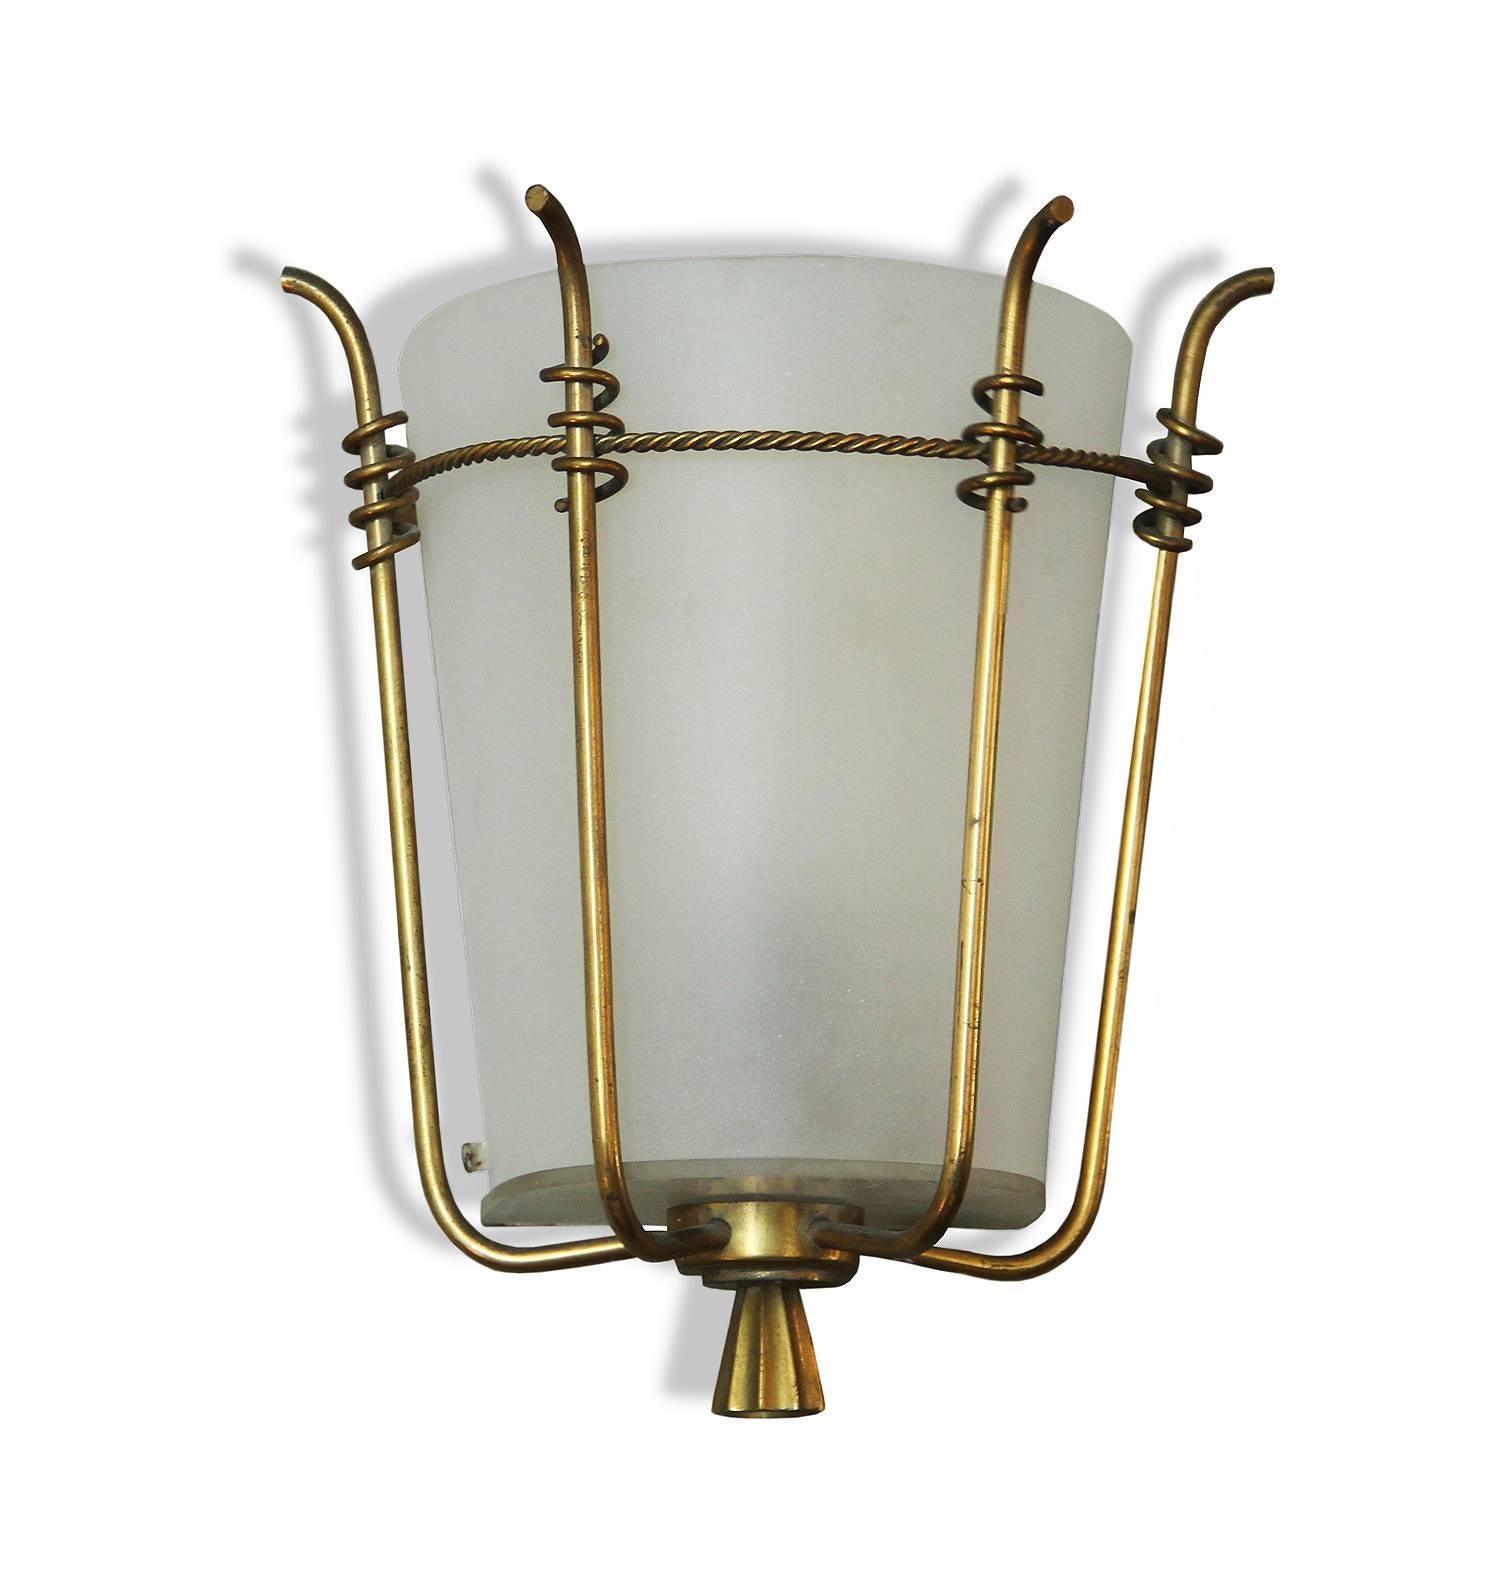 Marius-Ernest Sabino (1878-1961).

Very rare elegant and beautiful pair of sconces in brass with frosted glass and lacquered metal. Four brass arms encase the glass connected by a twisted brass rope.

Complete with an ornamental finial at the